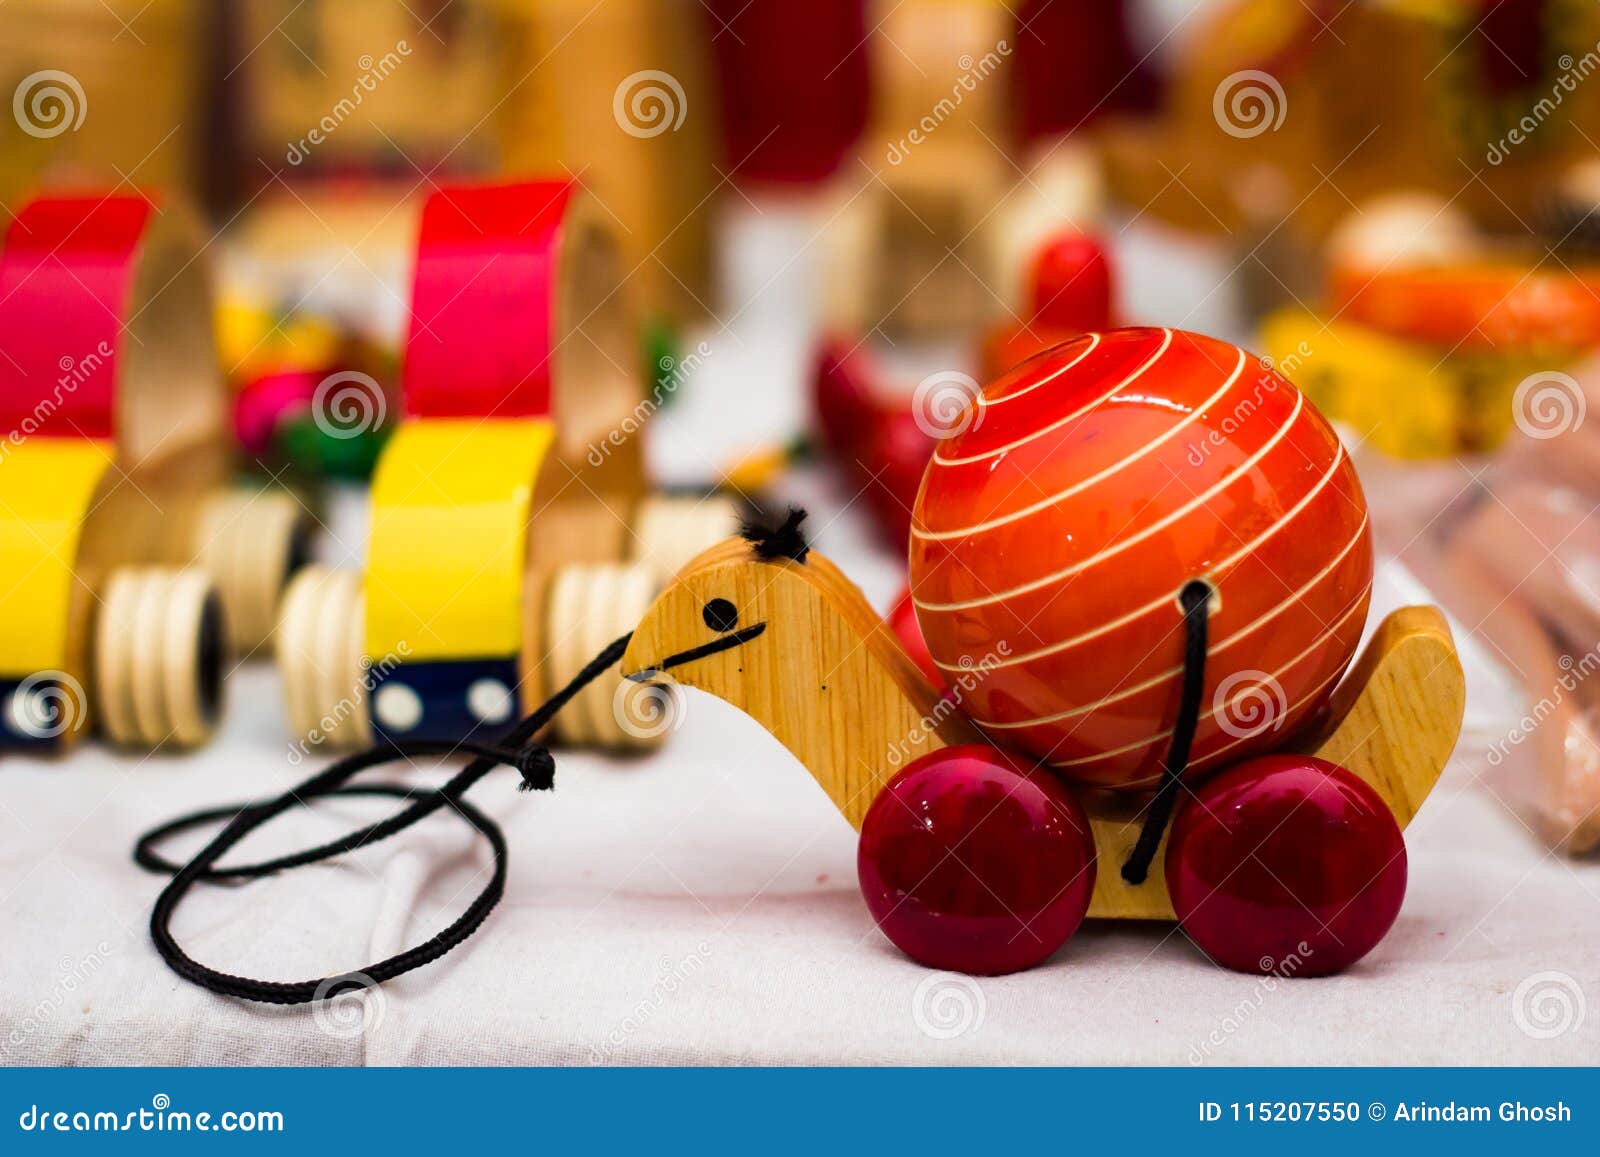 Royalty Free Stock Vintage colourful old wooden turtle tortoise toy on wheels to be dragged by thread